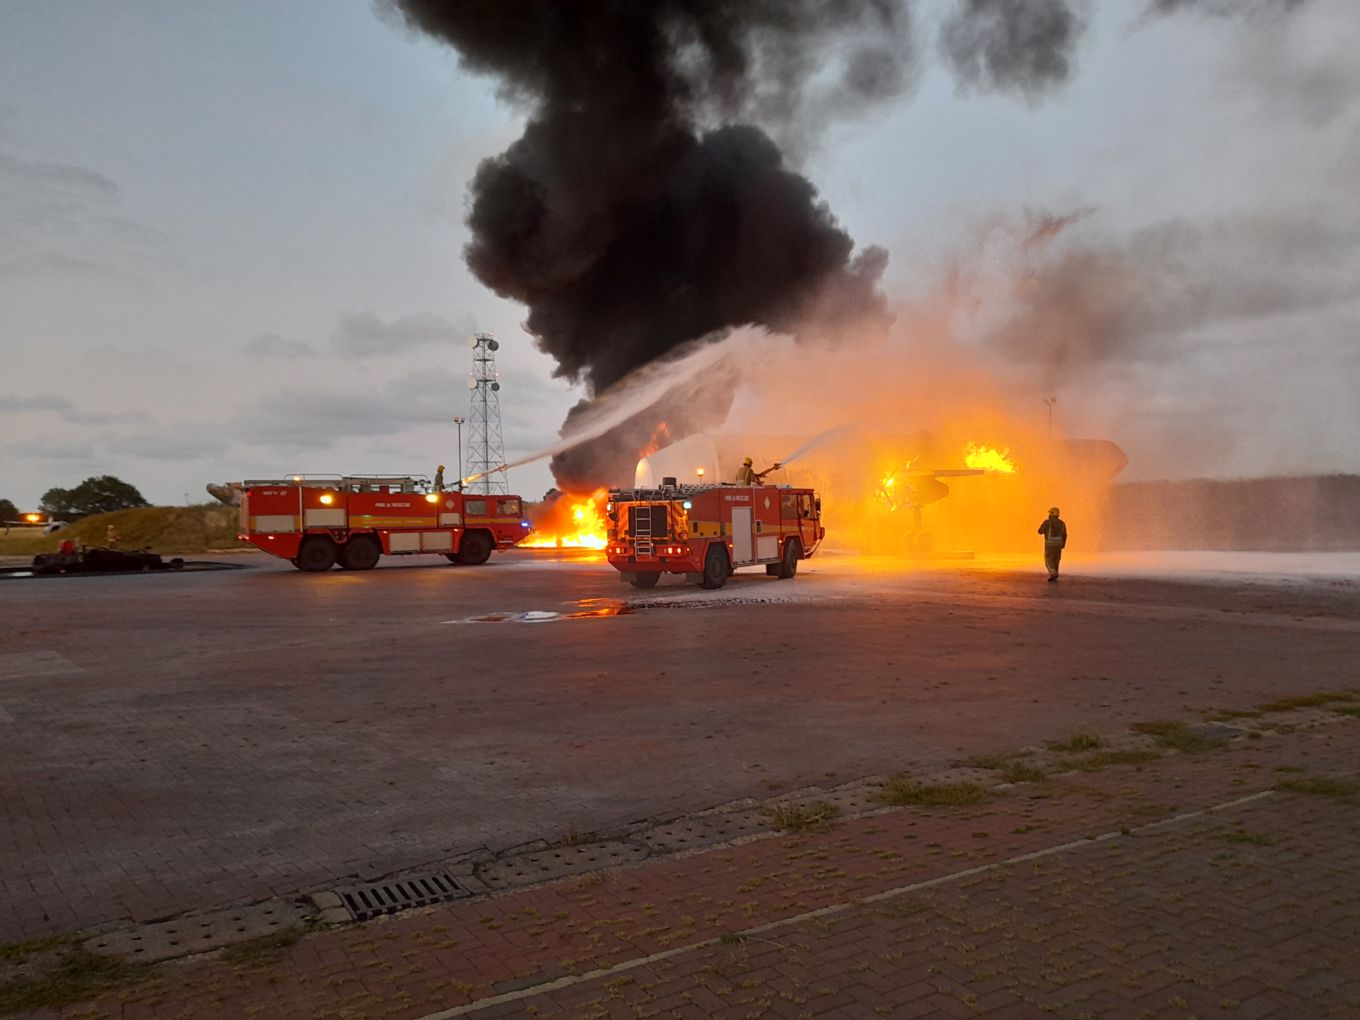 Two Fire Engines put out a practise fire.